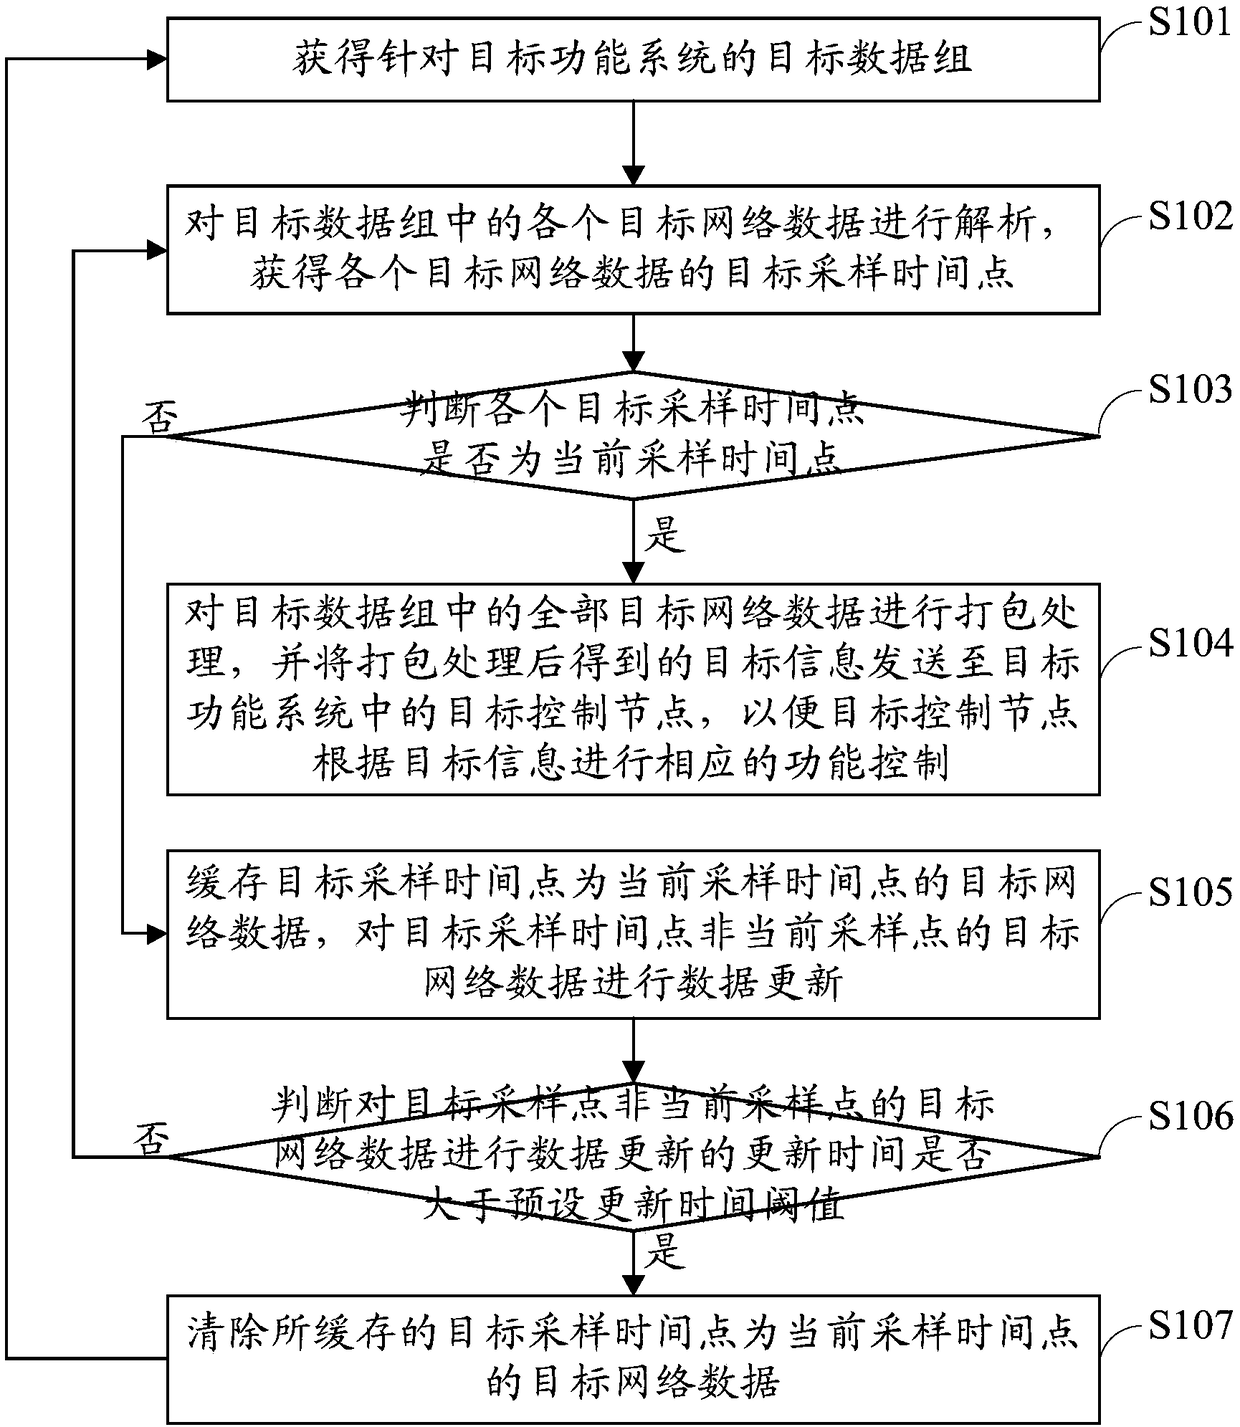 A method and system for vehicle data transmission